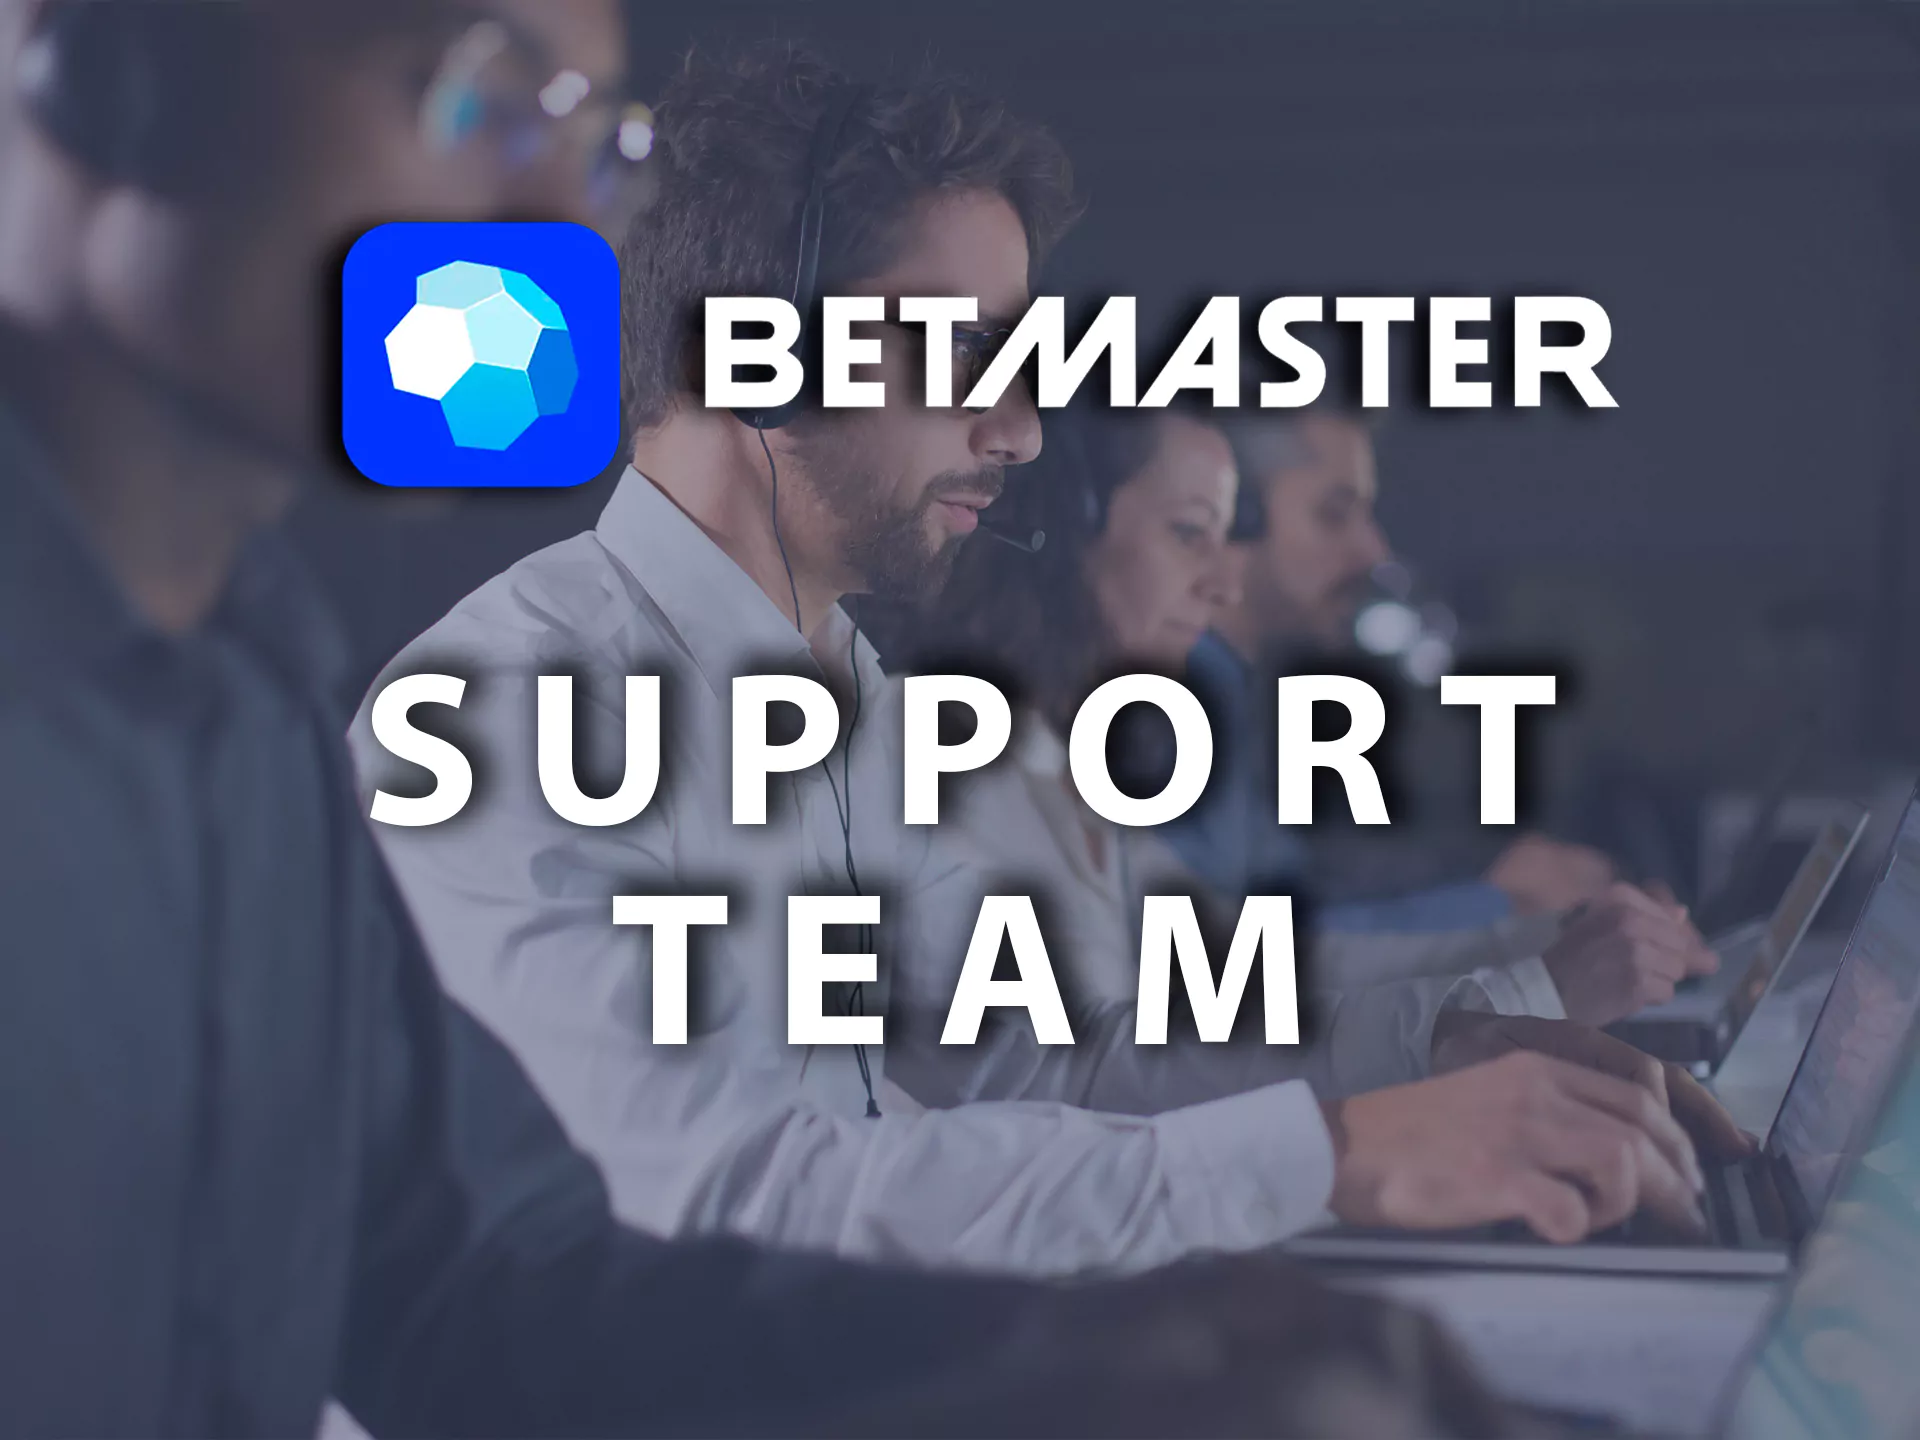 The Betmaster support team works 24/7 and can help with any betting-related questions.